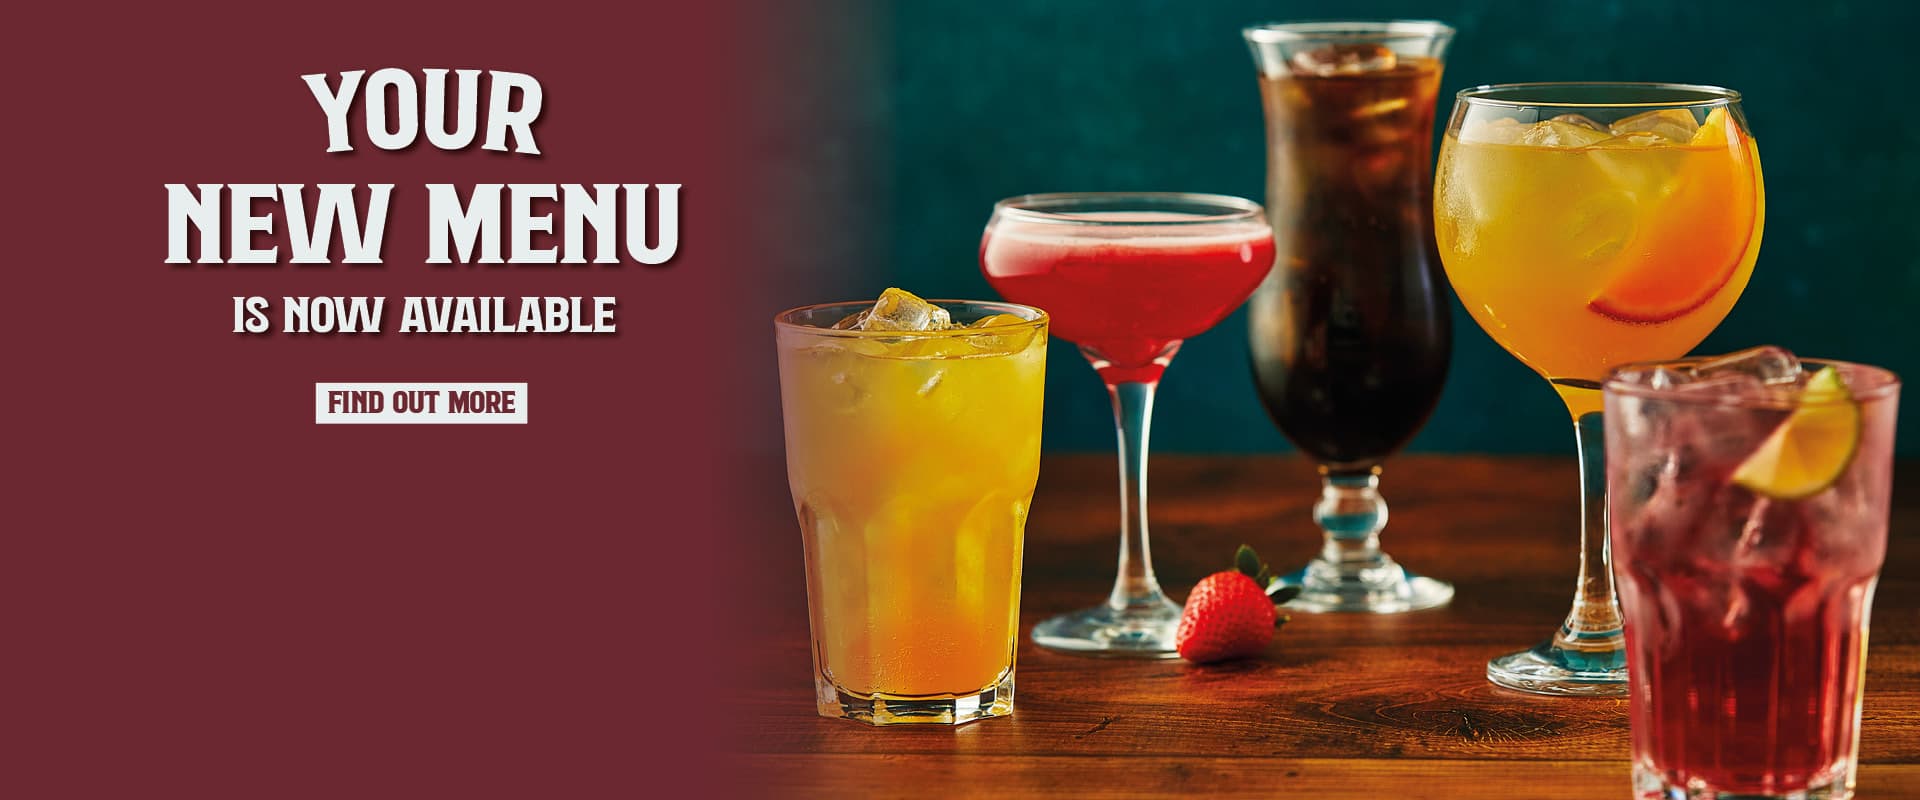 Your new drinks menu at The Elbow Room